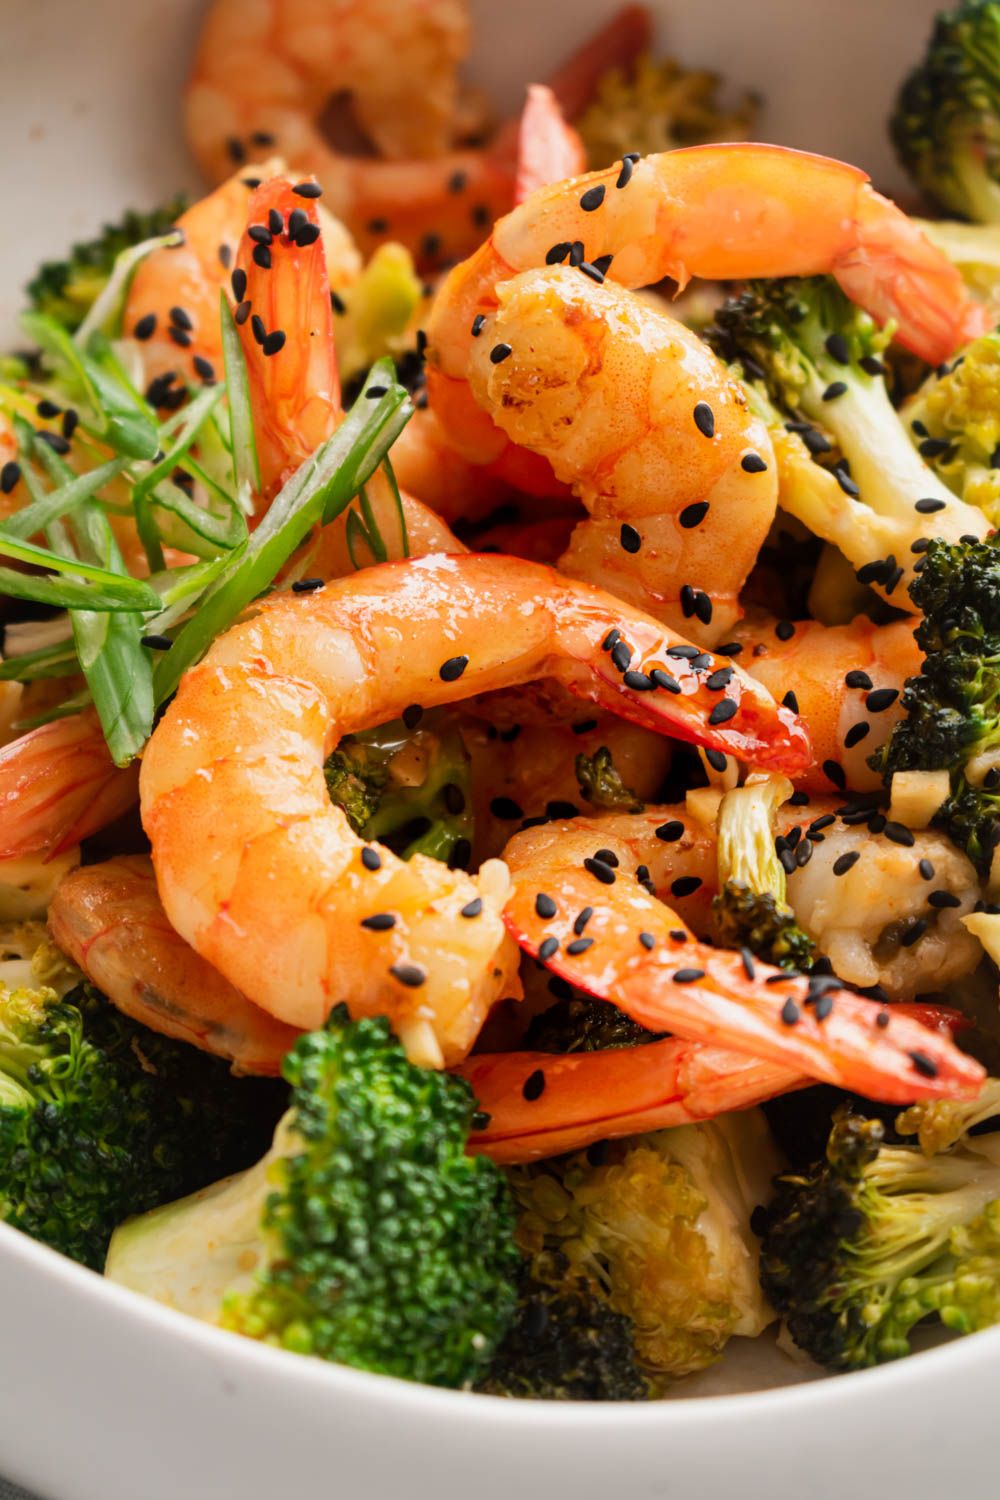 Chinese firecracker shrimp in a spicy sauce with broccoli in a bowl with sesame seeds and green onions.